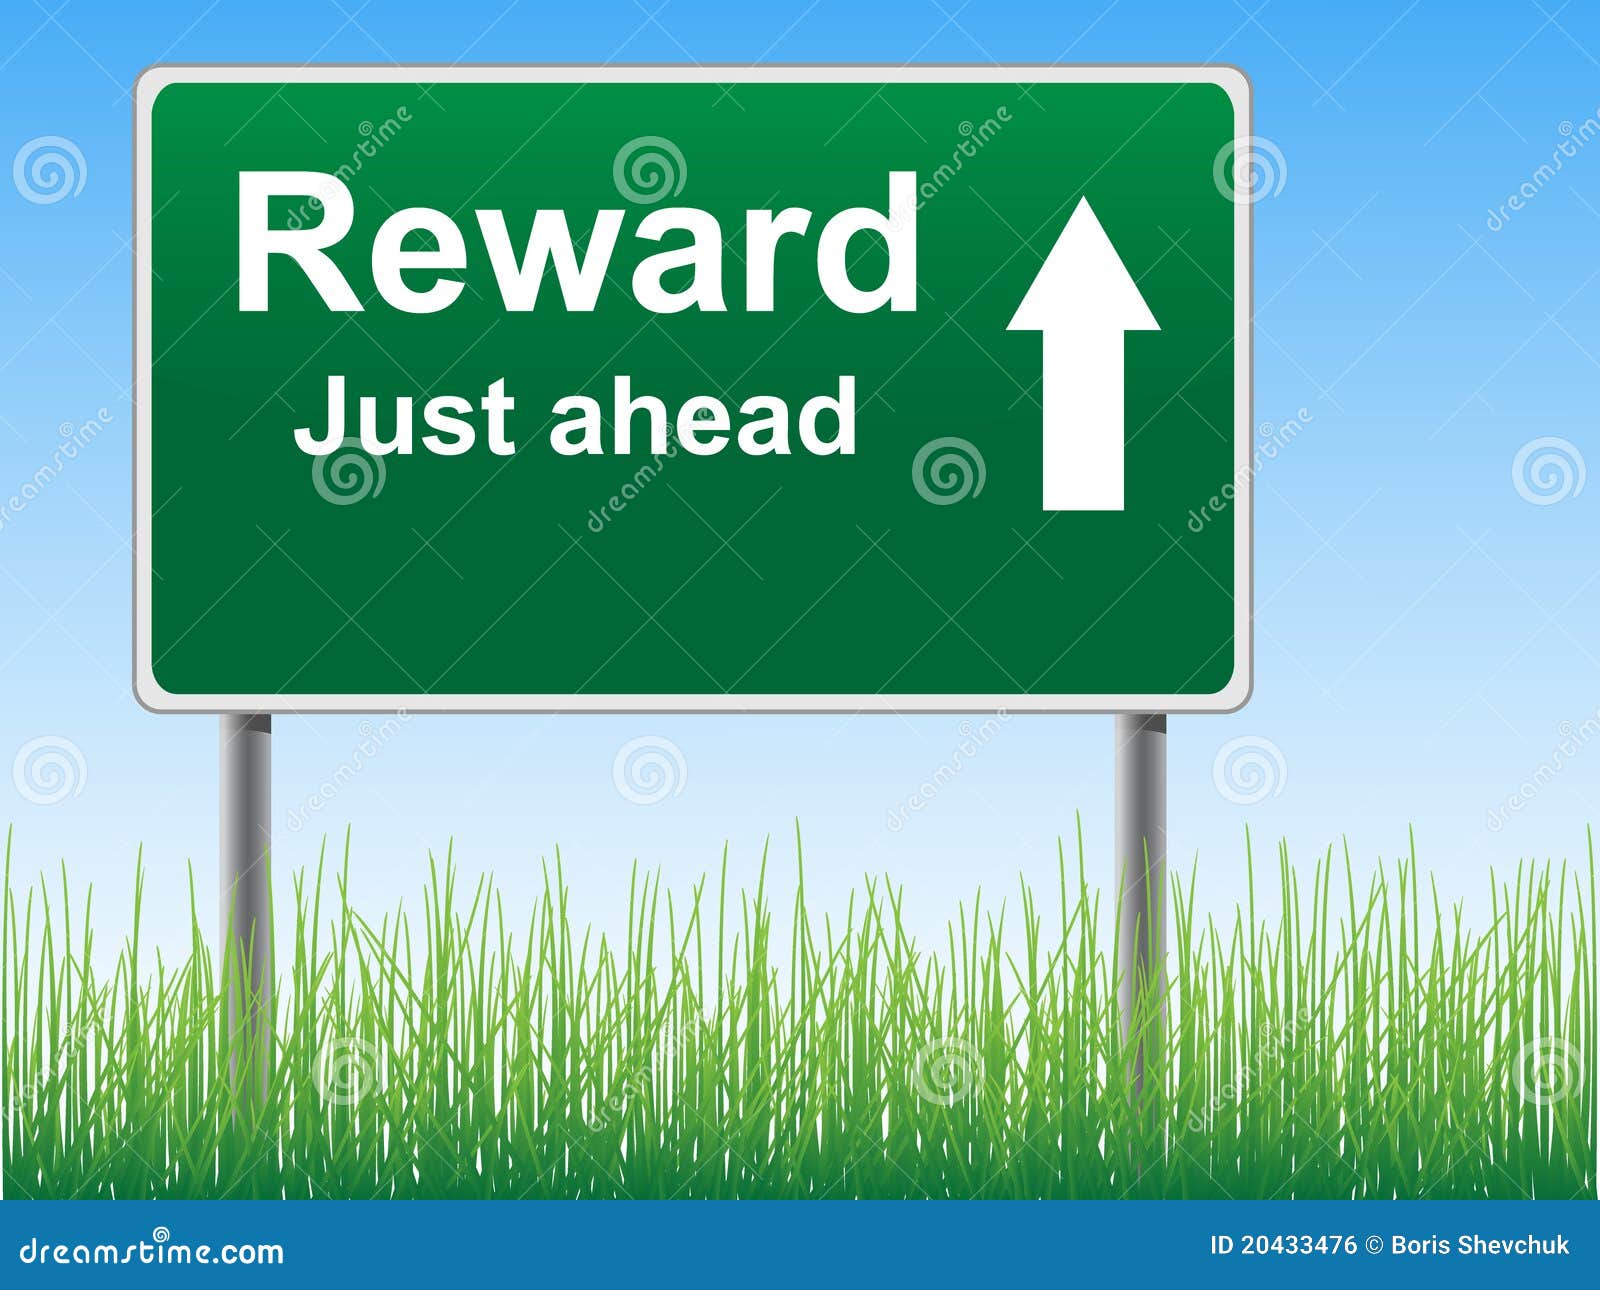 reward road sign on the sky background.